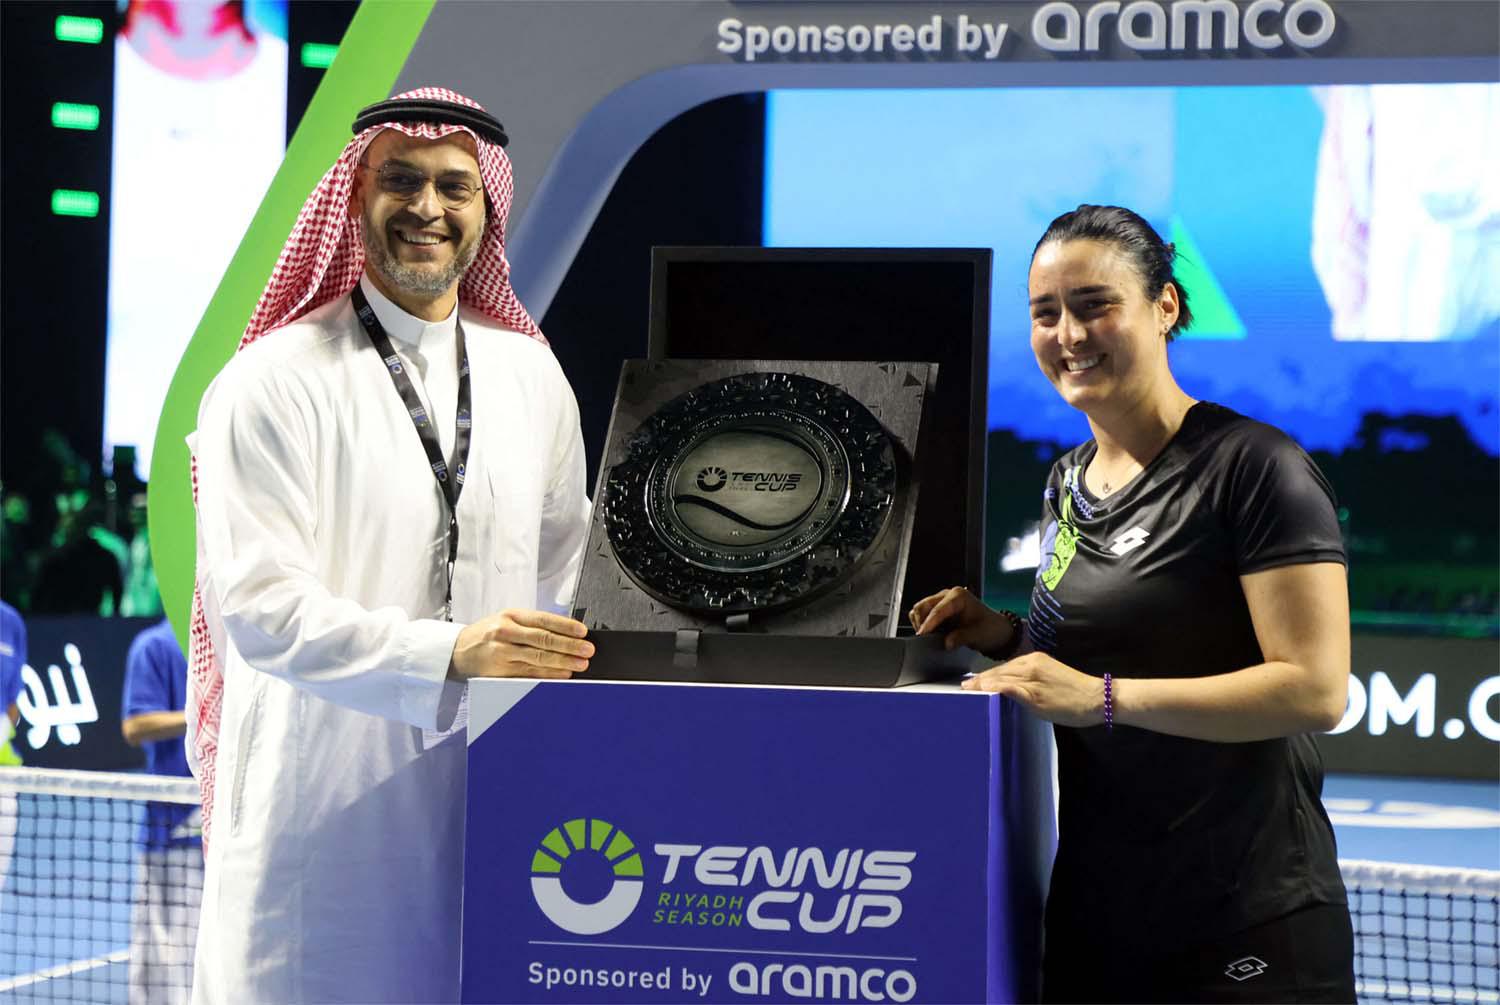 Ons Jabeur receiving a trophy in last month’s exhibition match in Riyadh